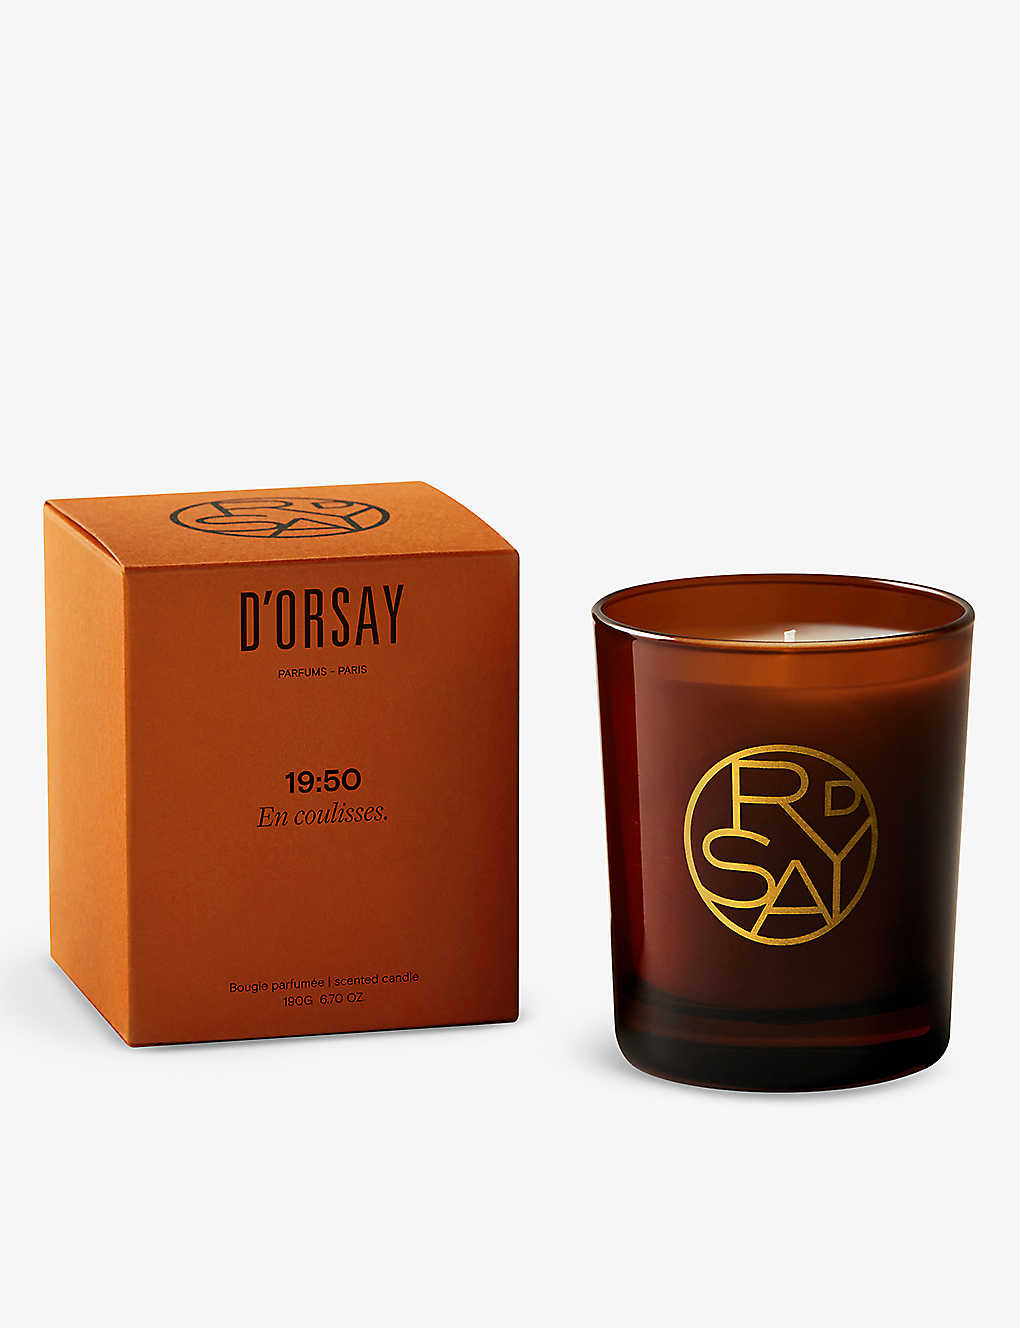 D'orsay 19:50 Scented Candle 190g